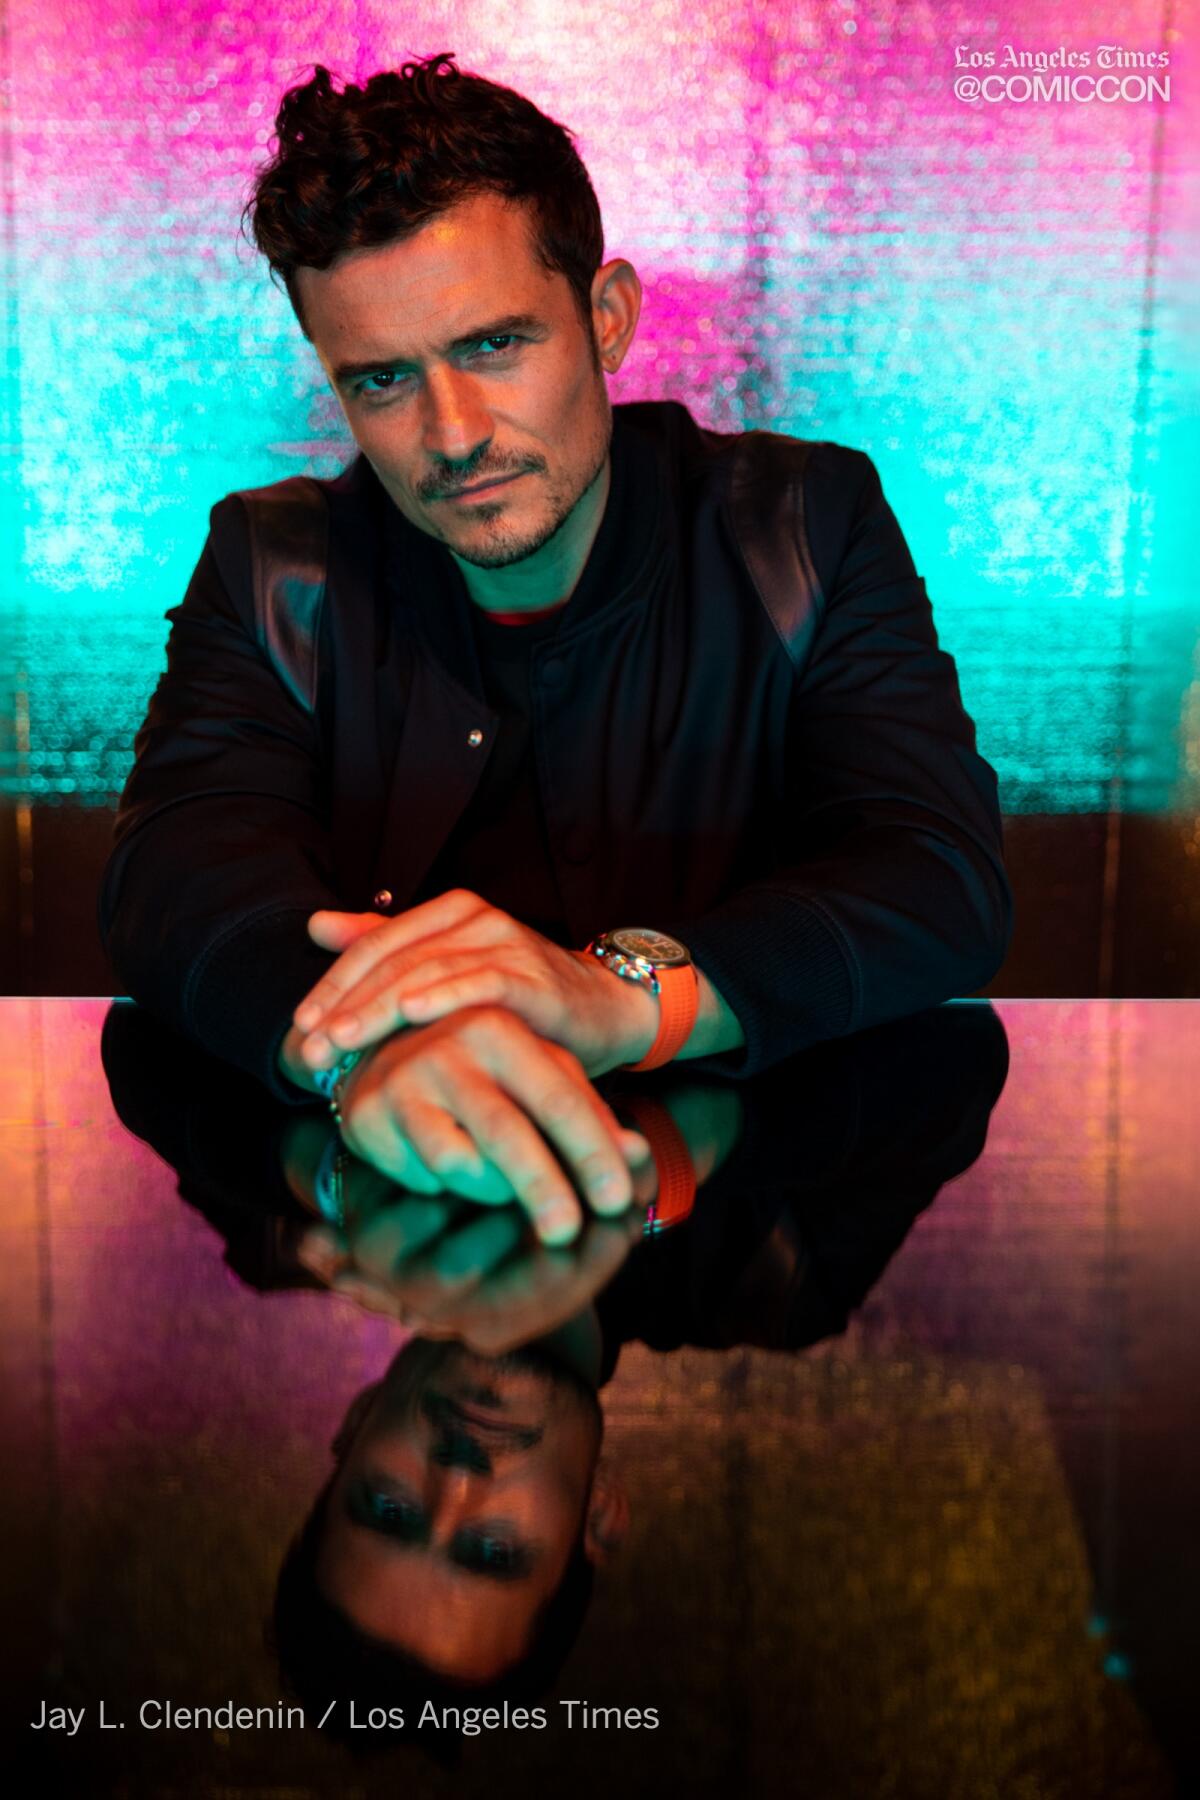 Actor Orlando Bloom from the television series, "Carnival Row," photographed at the L.A. Times Photo and Video Studio at Comic-Con International on Friday, July 19, 2019.